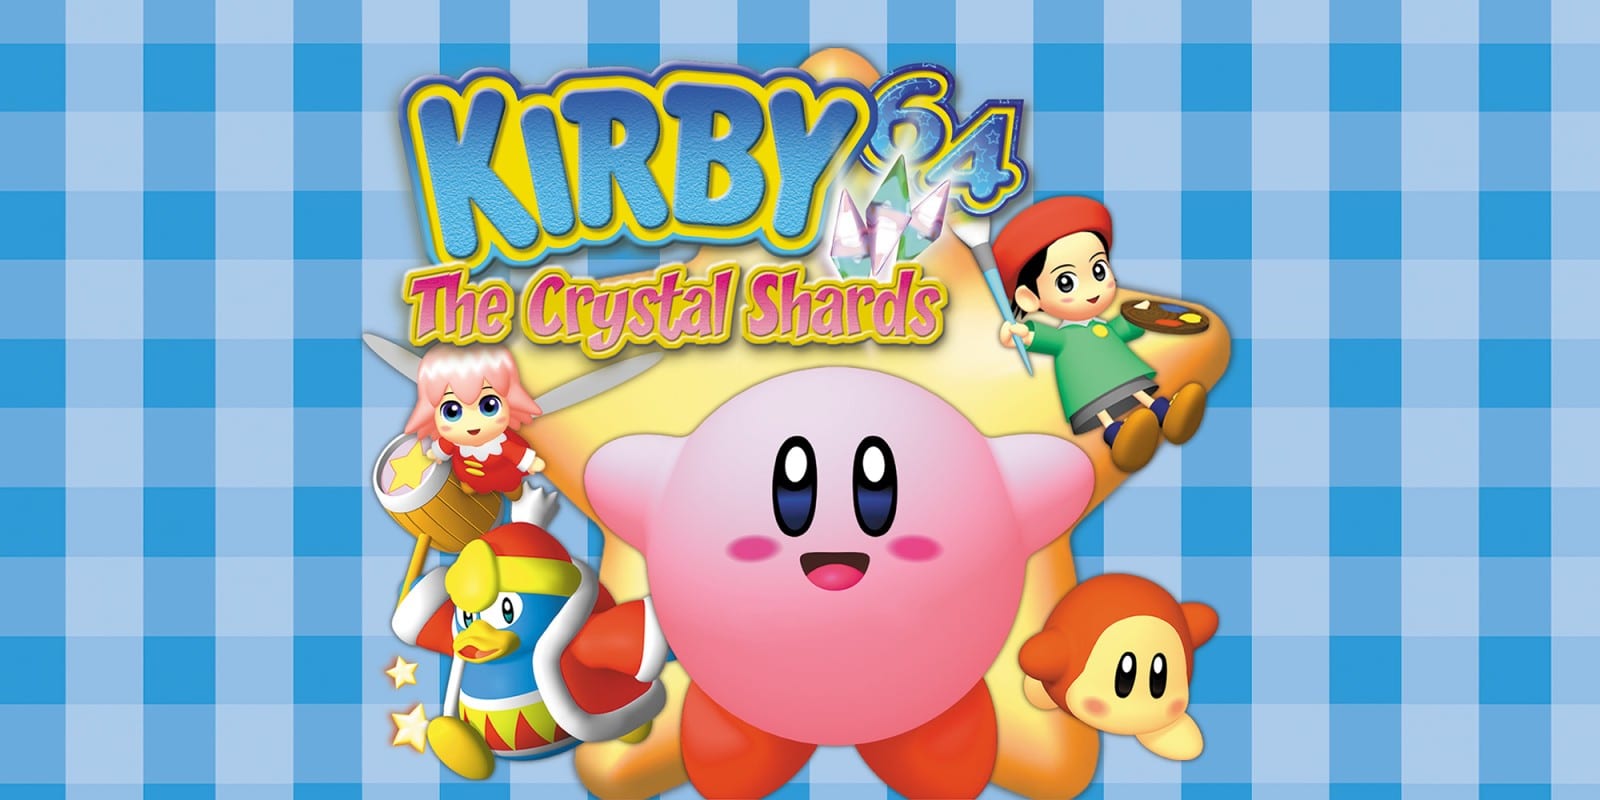 Kirby 64: The Crystal Shards Releasing for Nintendo Switch Online + Expansion Pack Next Week